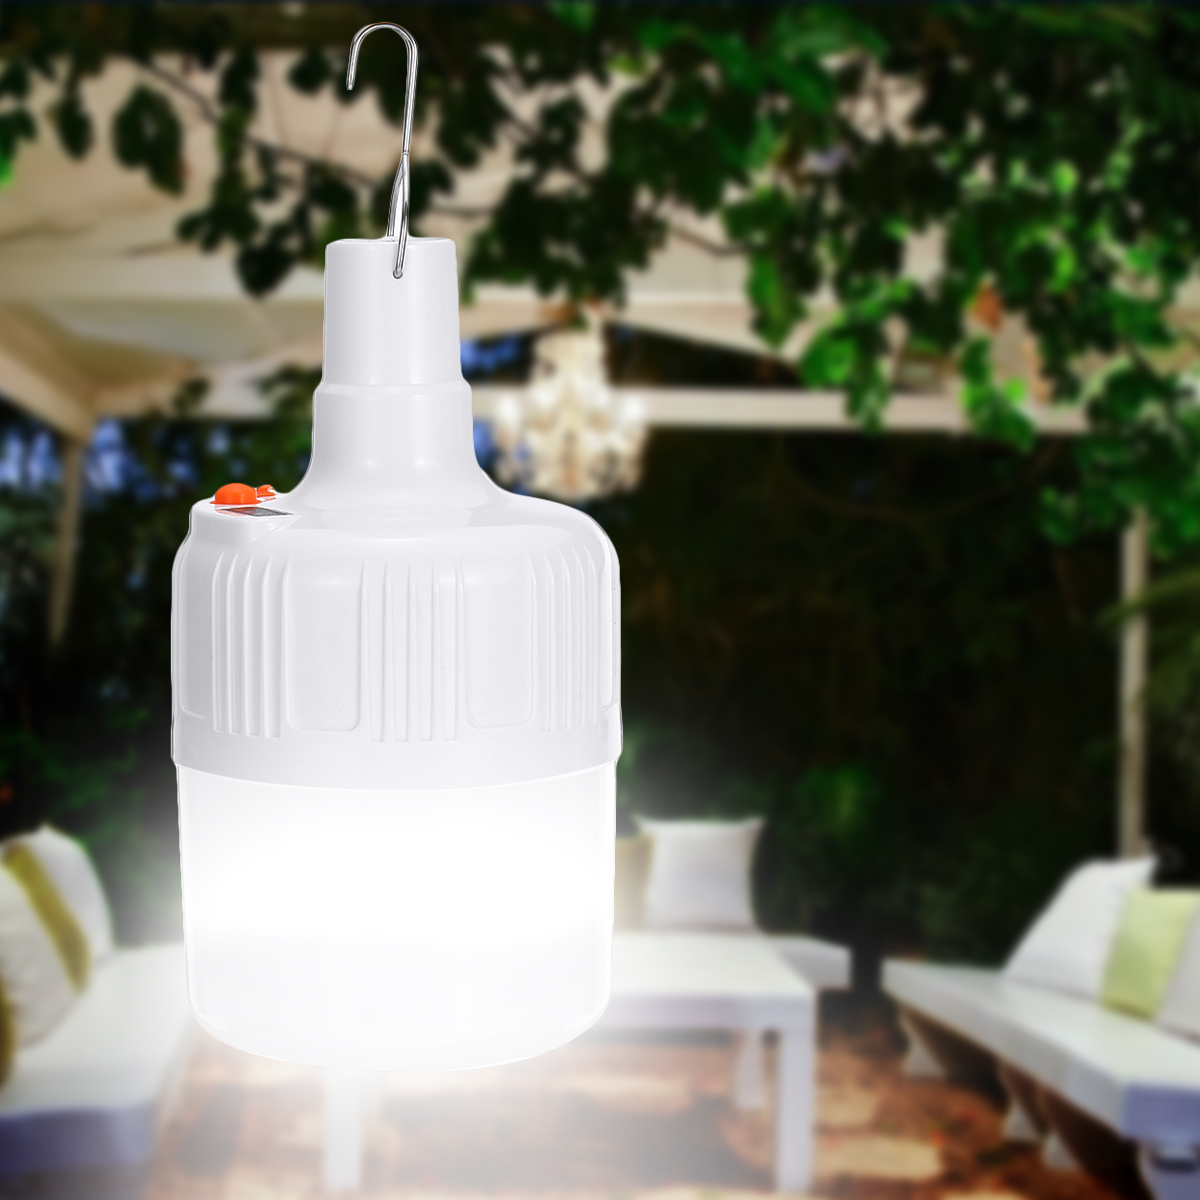 Rechargeable-5-Modes-Solar-Powered-LED-Bulb-Emergency-Light-for-Outdoor-Camping-Use-1634329-1